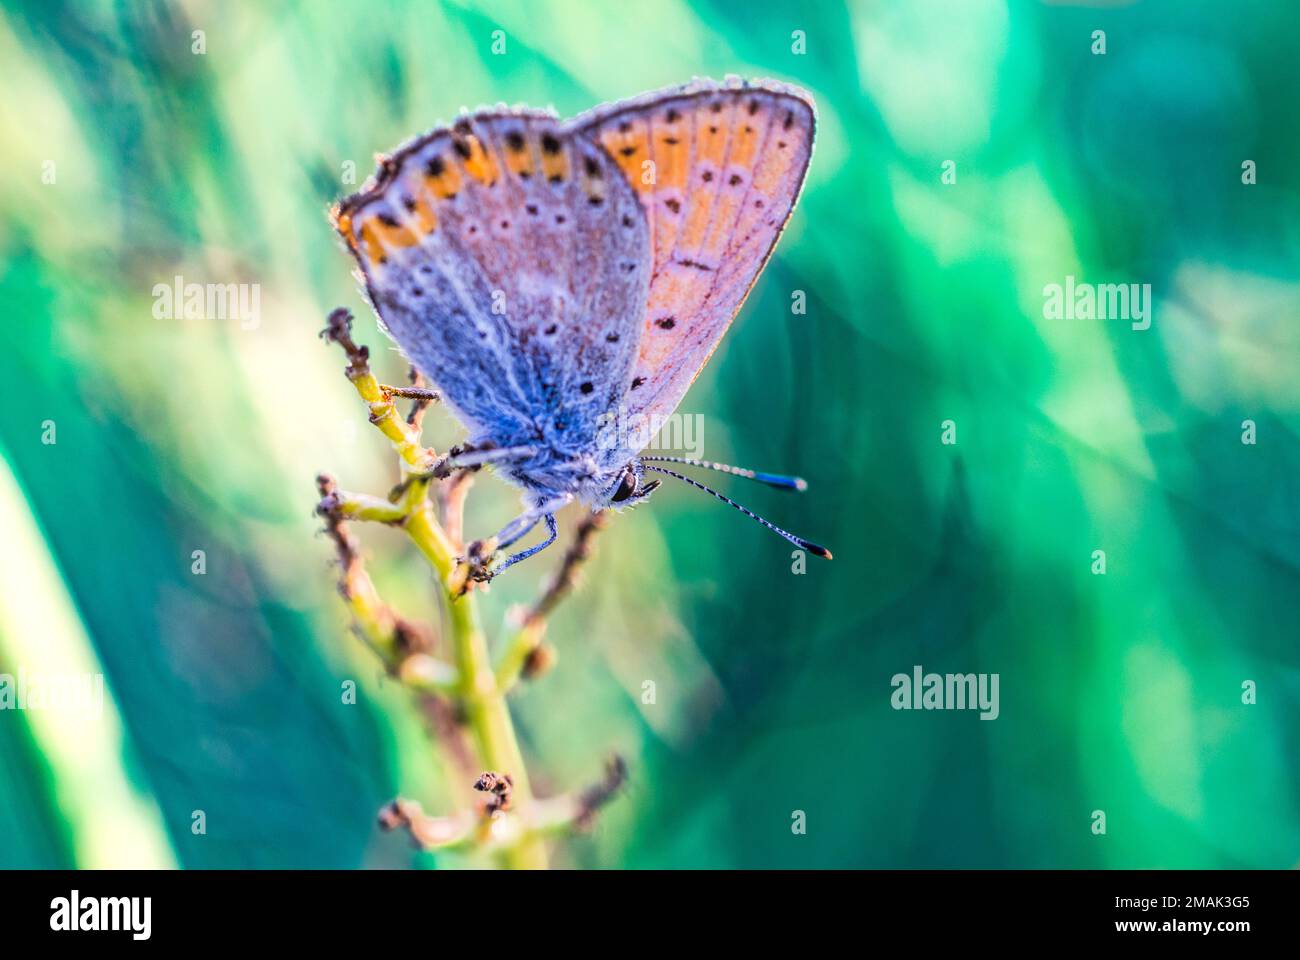 Close-up of a Lycaenidae butterfly sitting on a wildflower with a blurred background Stock Photo